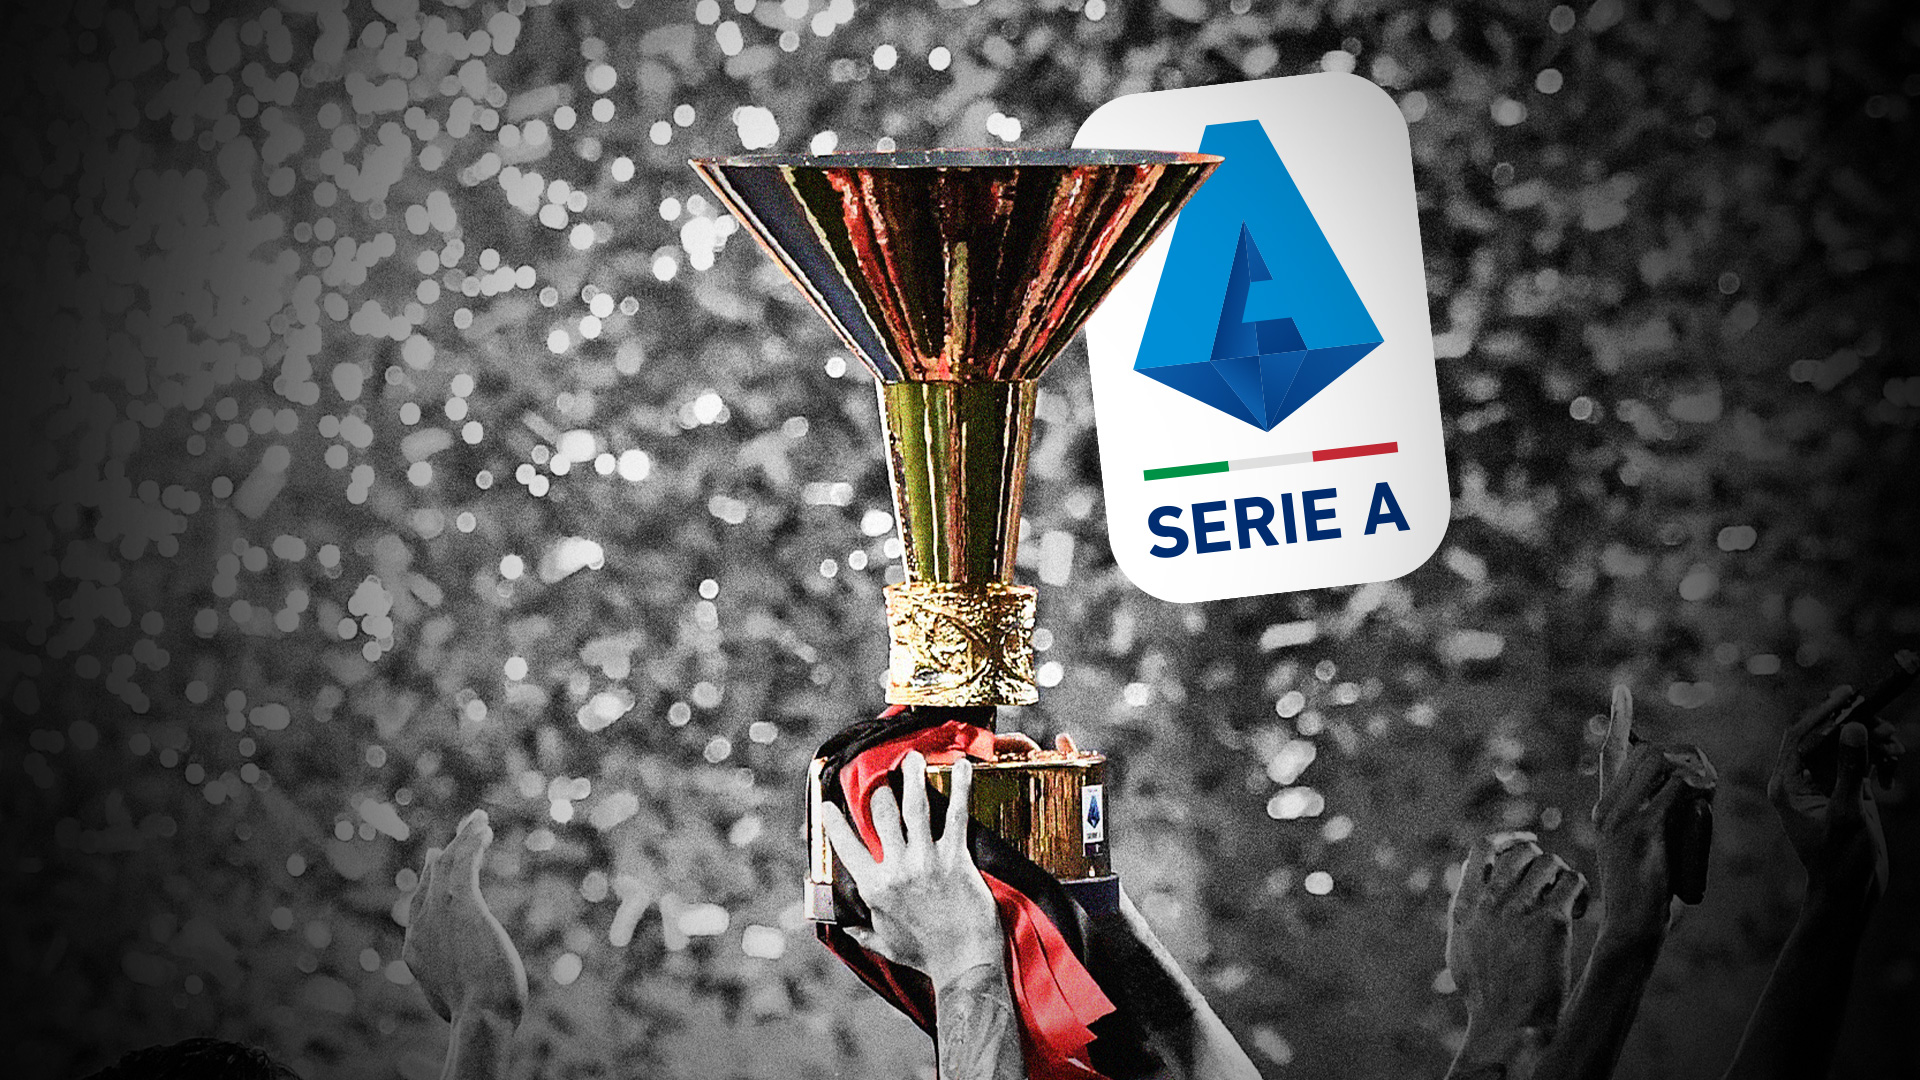 History of Serie A